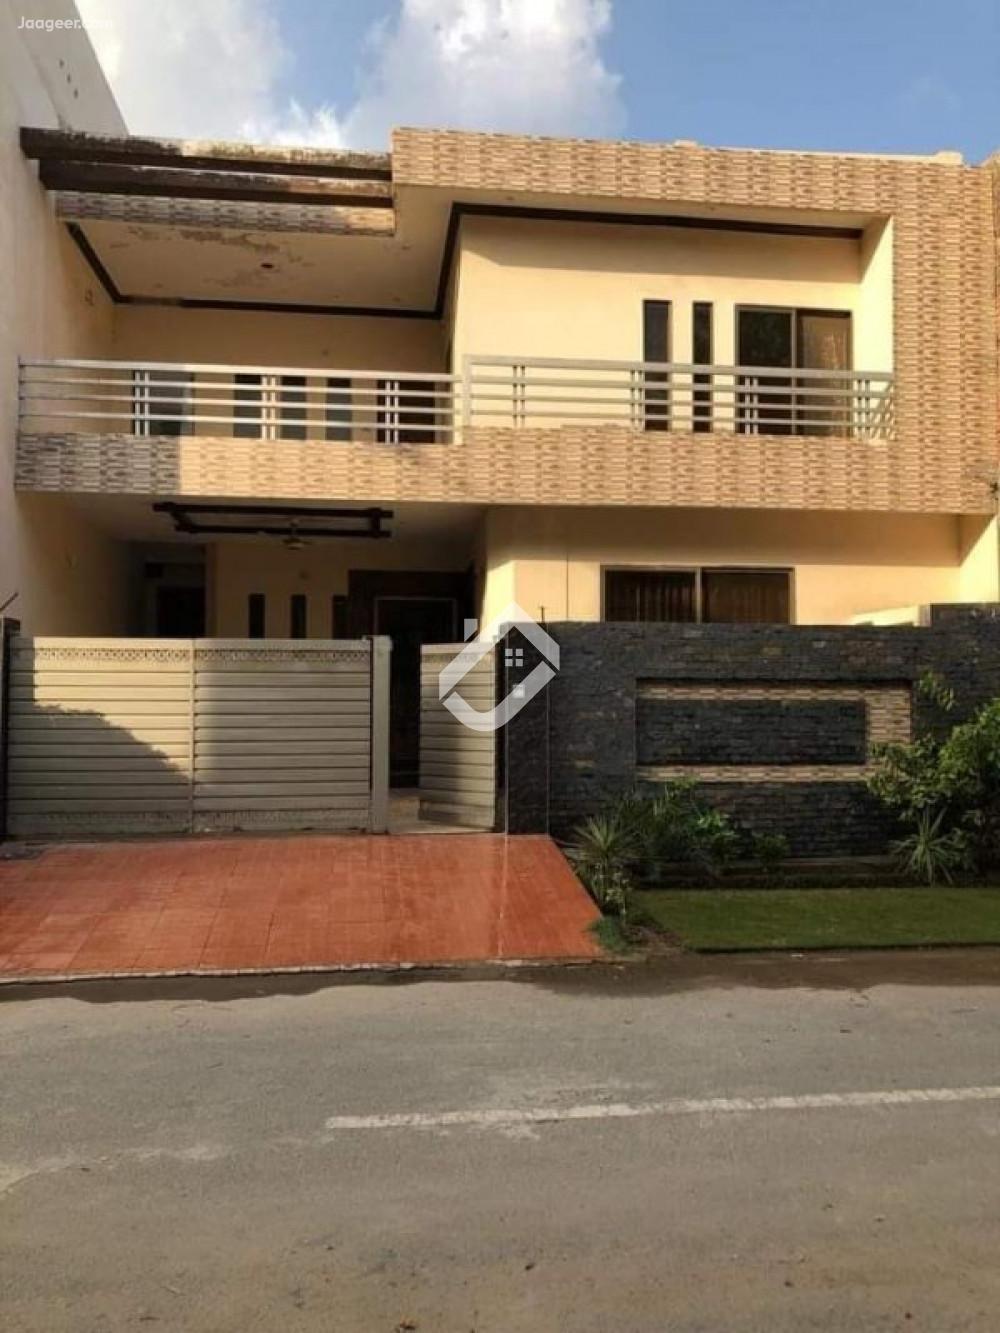 Main image 7.5 Marla Double Storey House For Sale In Model City  Model City 1 Faisalabad 